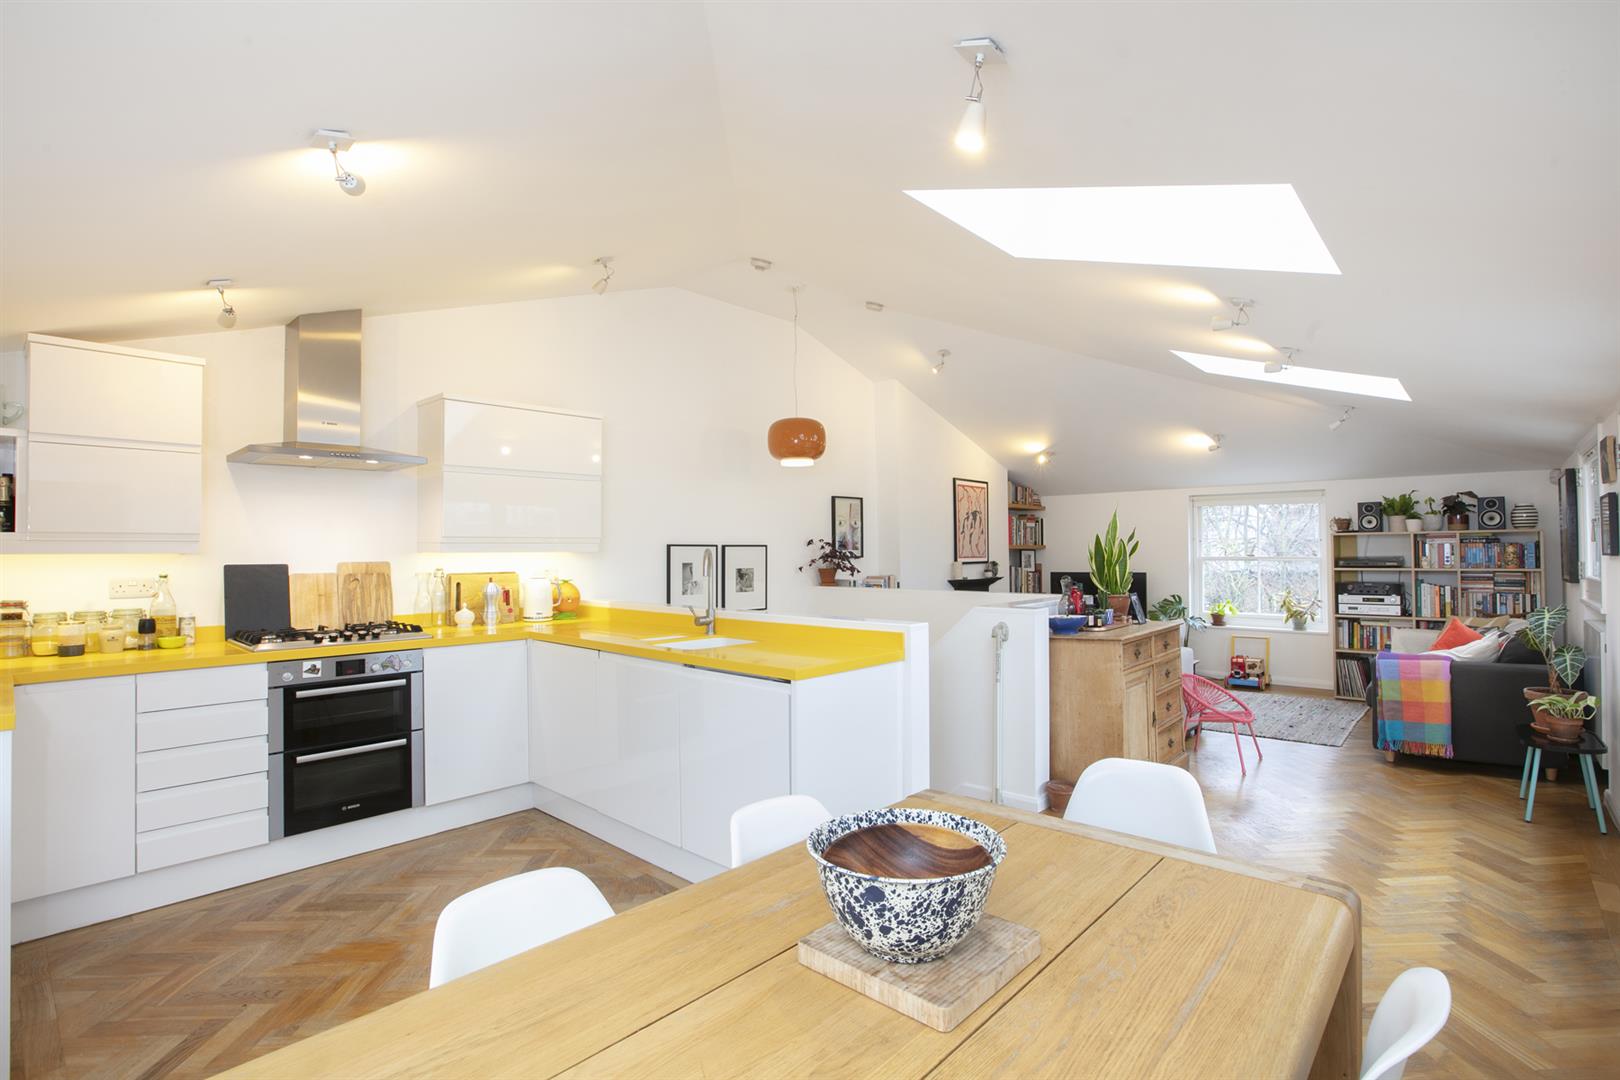 Flat - Conversion Under Offer in Holly Grove, Peckham, SE15 893 view4